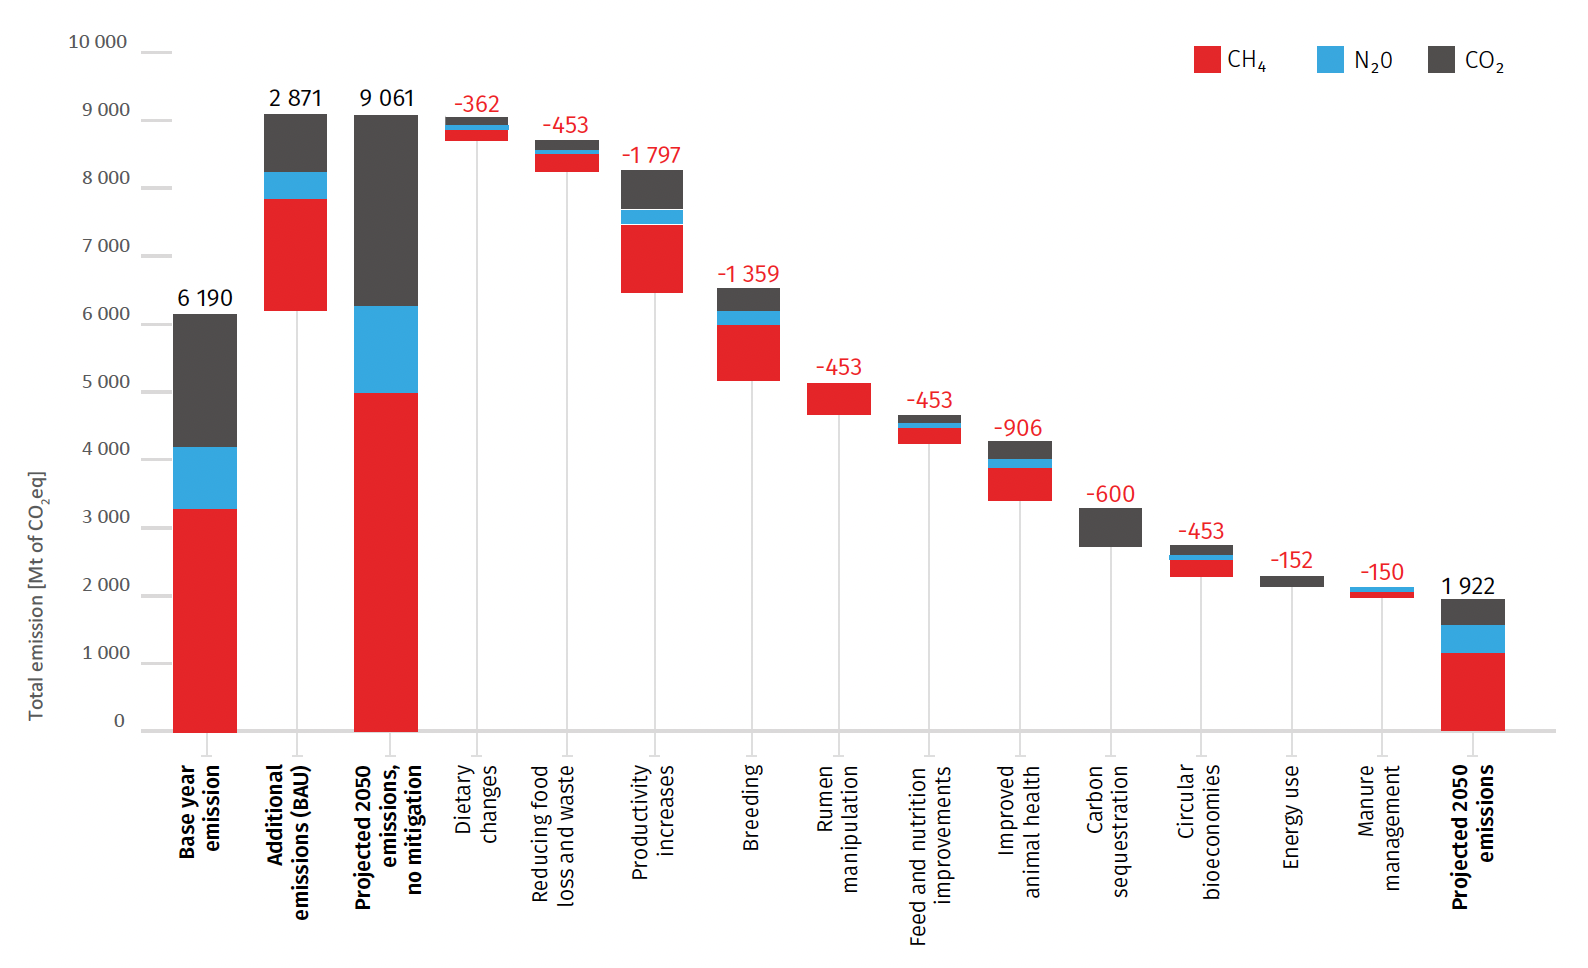 Base year and projected emissions from livestock systems shown as a waterfall chart with a range of mitigation measures applied to 2050 with their technical potential.